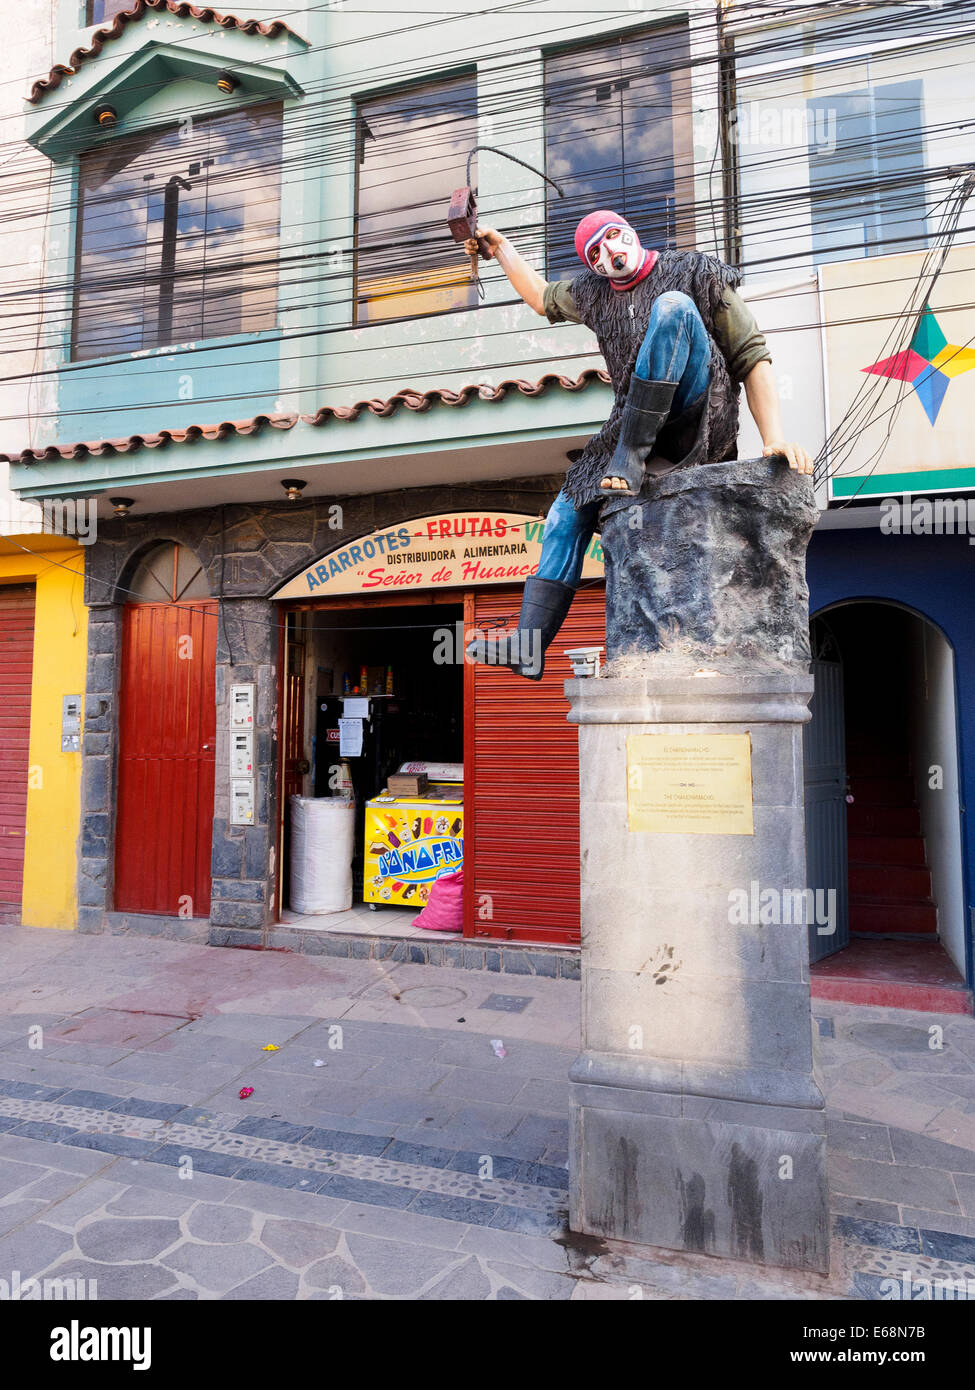 Statue of 'El Chanchanmacho' - Chivay, Peru El Chanchanmacho its a humorous character, playful wgo goes opening espace for the Turko's dancers. He has to ridicule viewer people and the people from the town. Some people say he is the thief of beautiful women. Stock Photo